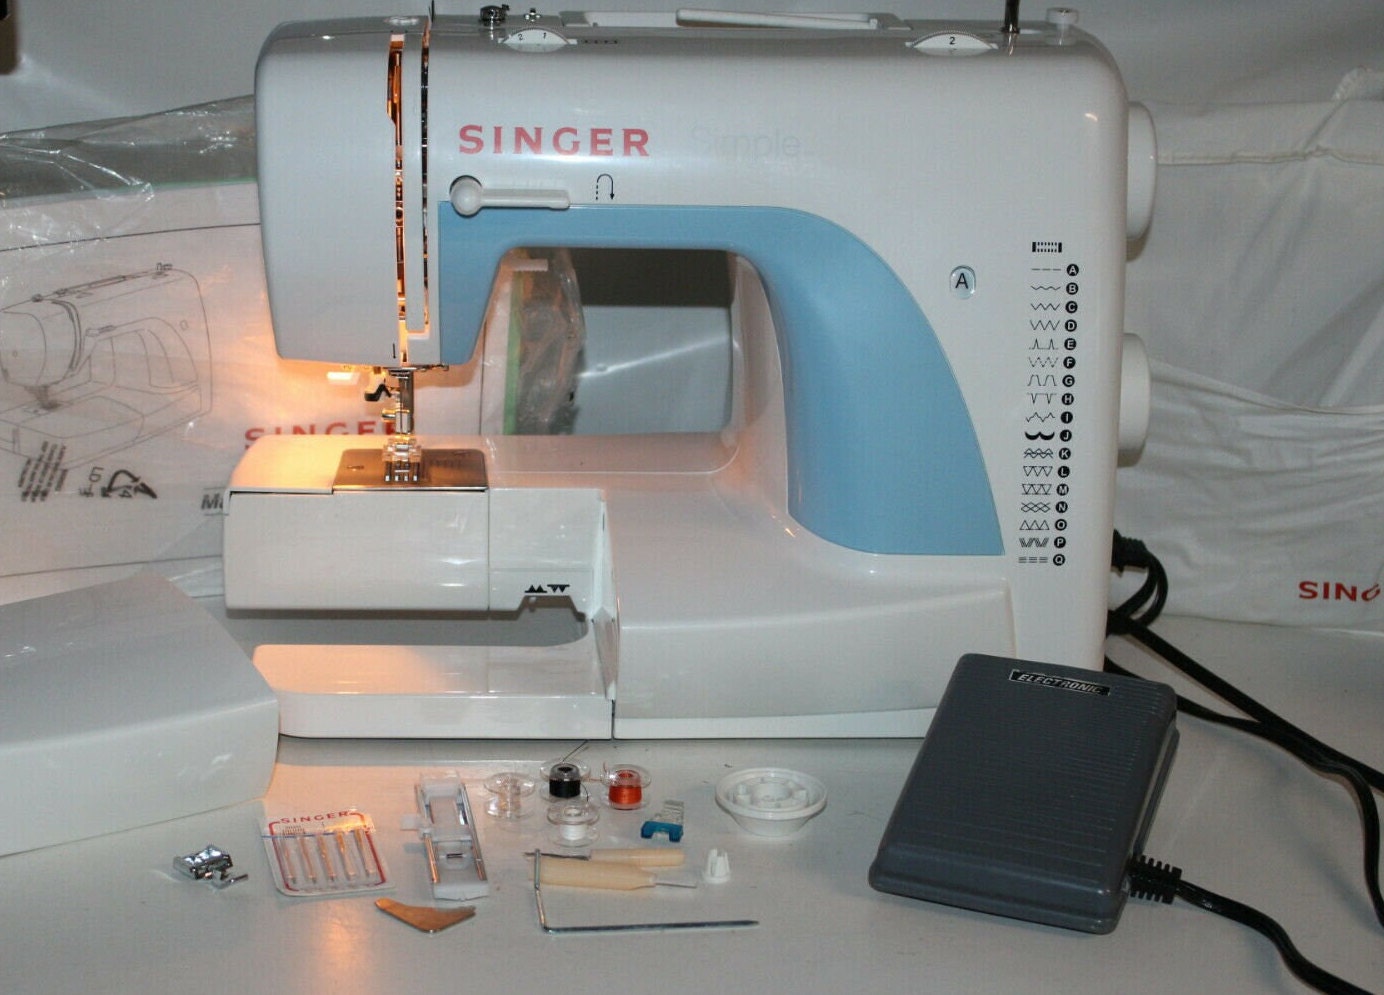 Singer Simple Sewing Machine 2263 With Hard Case for Sale in